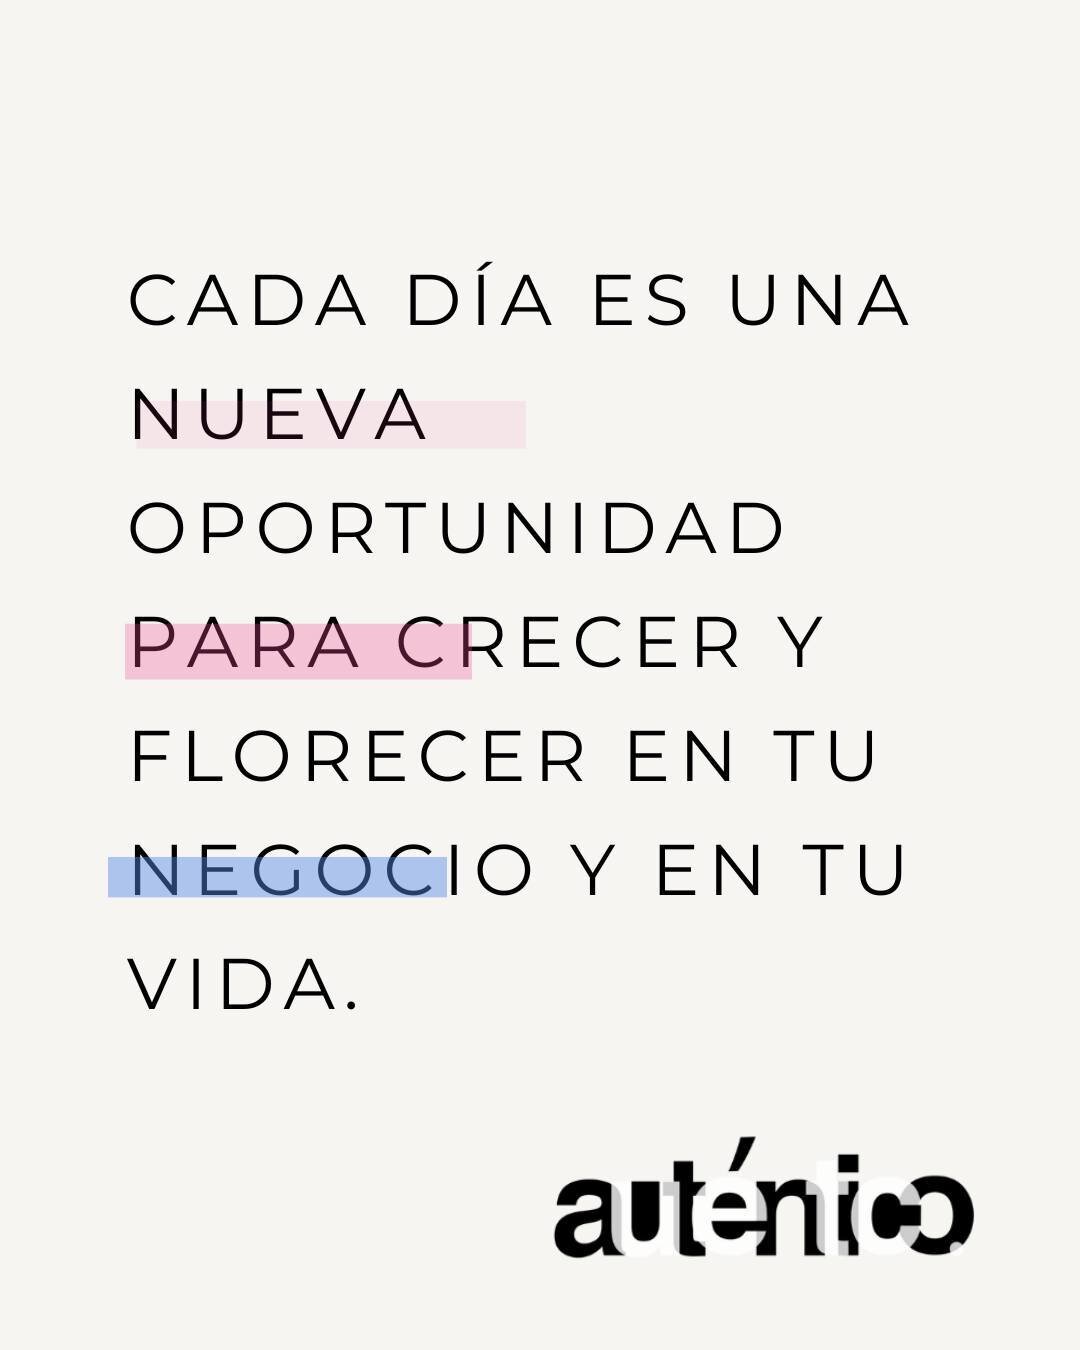 Empieza la semana inspirad@
Let the week begin with inspiration.

Every day is a new opportunity to grow and flourish in your business and in your life 

#Autenticopodcast #autentico #cadadia #everydayisanopportunity #liveyourdash #grow #creciendojun